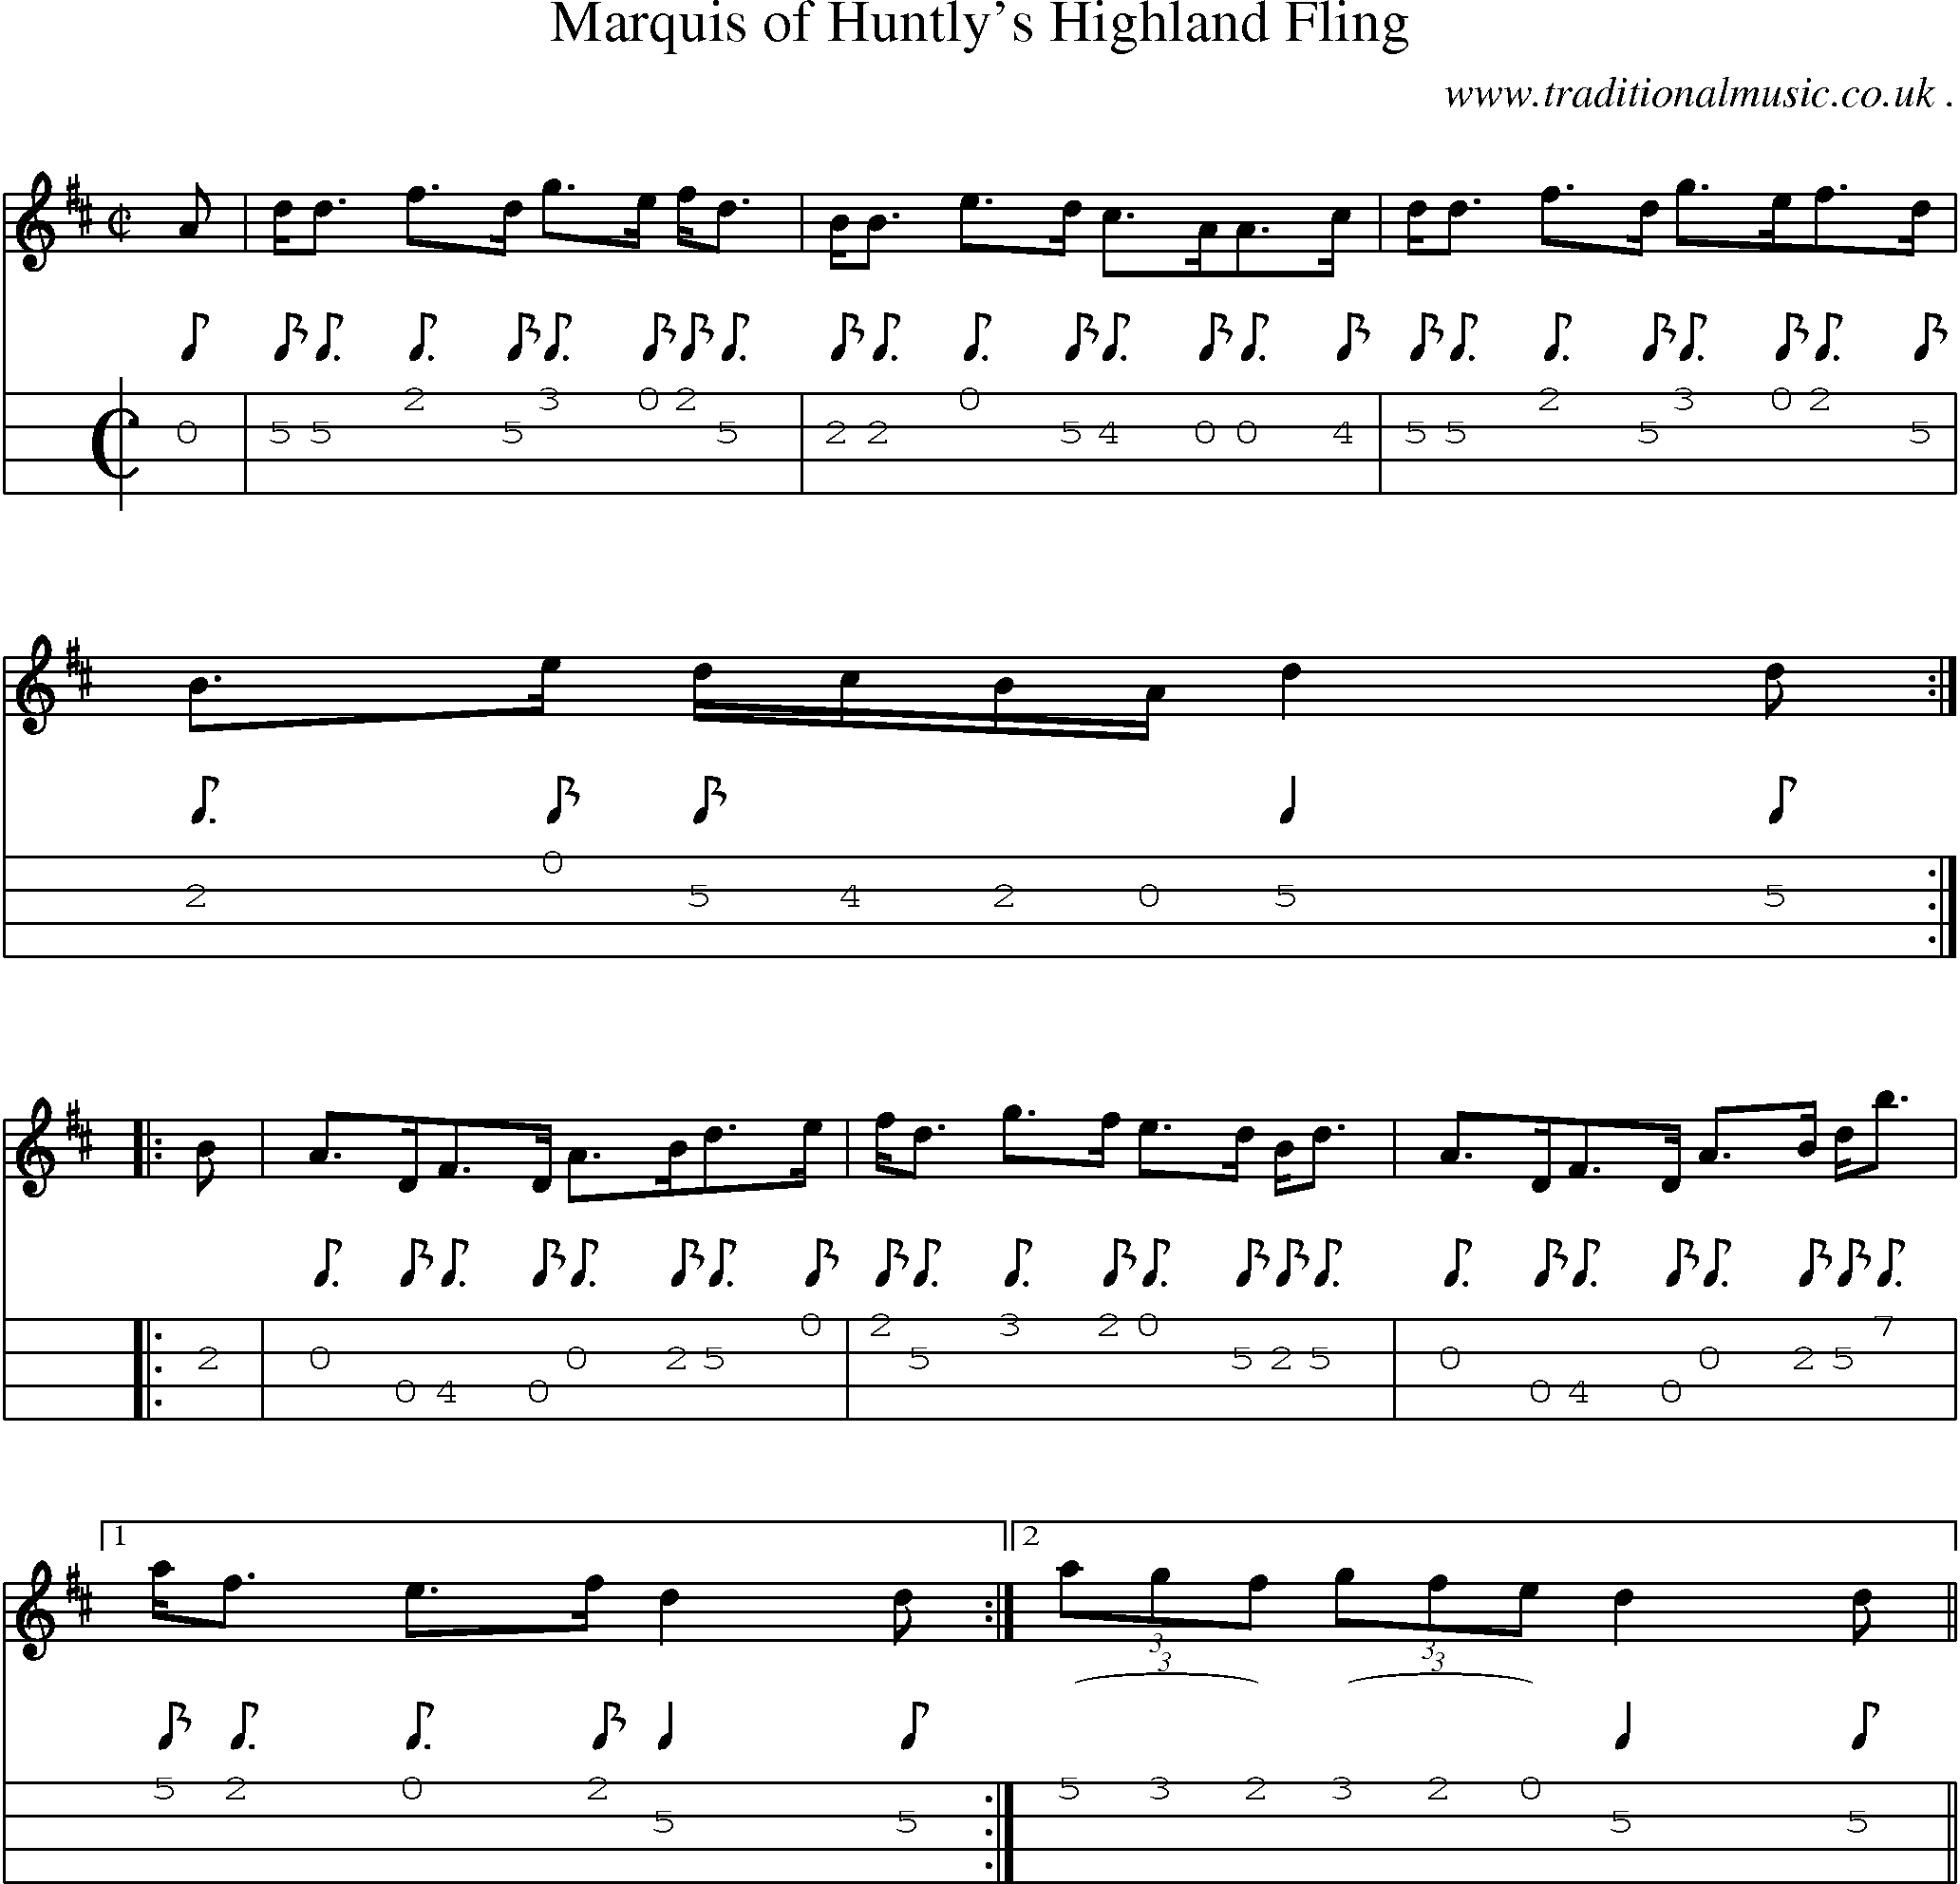 Sheet-music  score, Chords and Mandolin Tabs for Marquis Of Huntlys Highland Fling